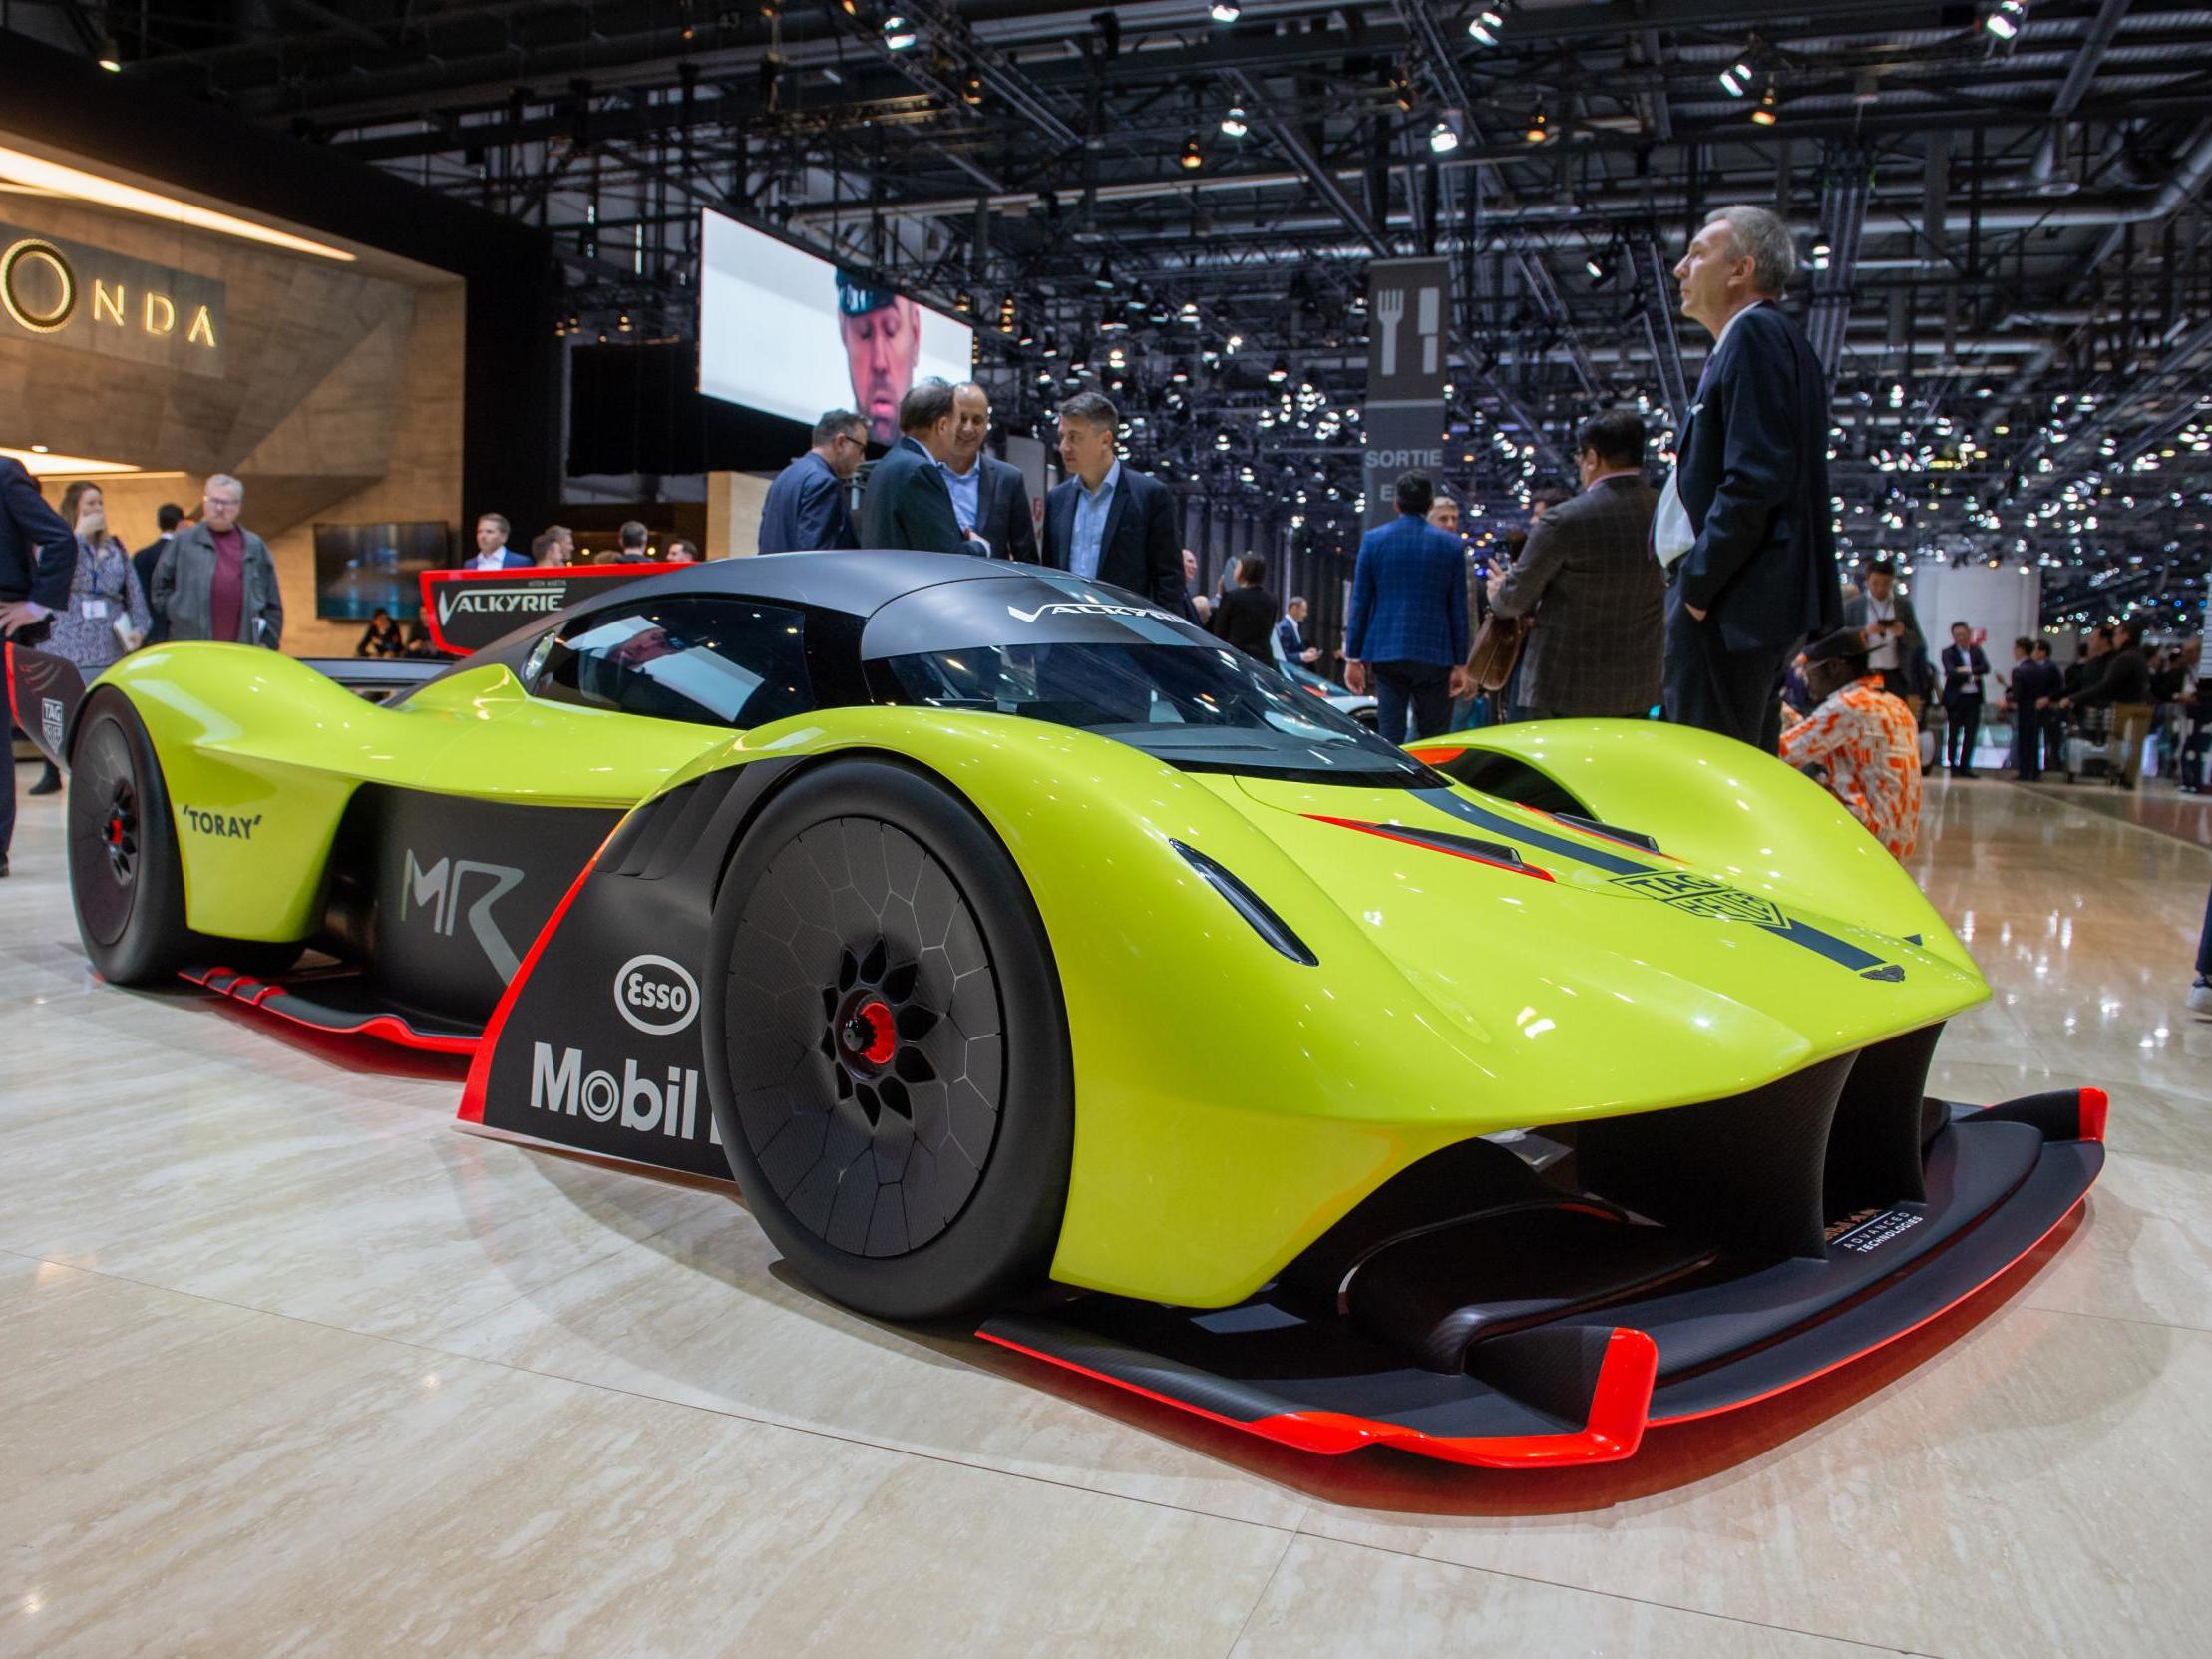 Aston Martin will race the Valkyrie in the 2021 Le Mans 24 Hours